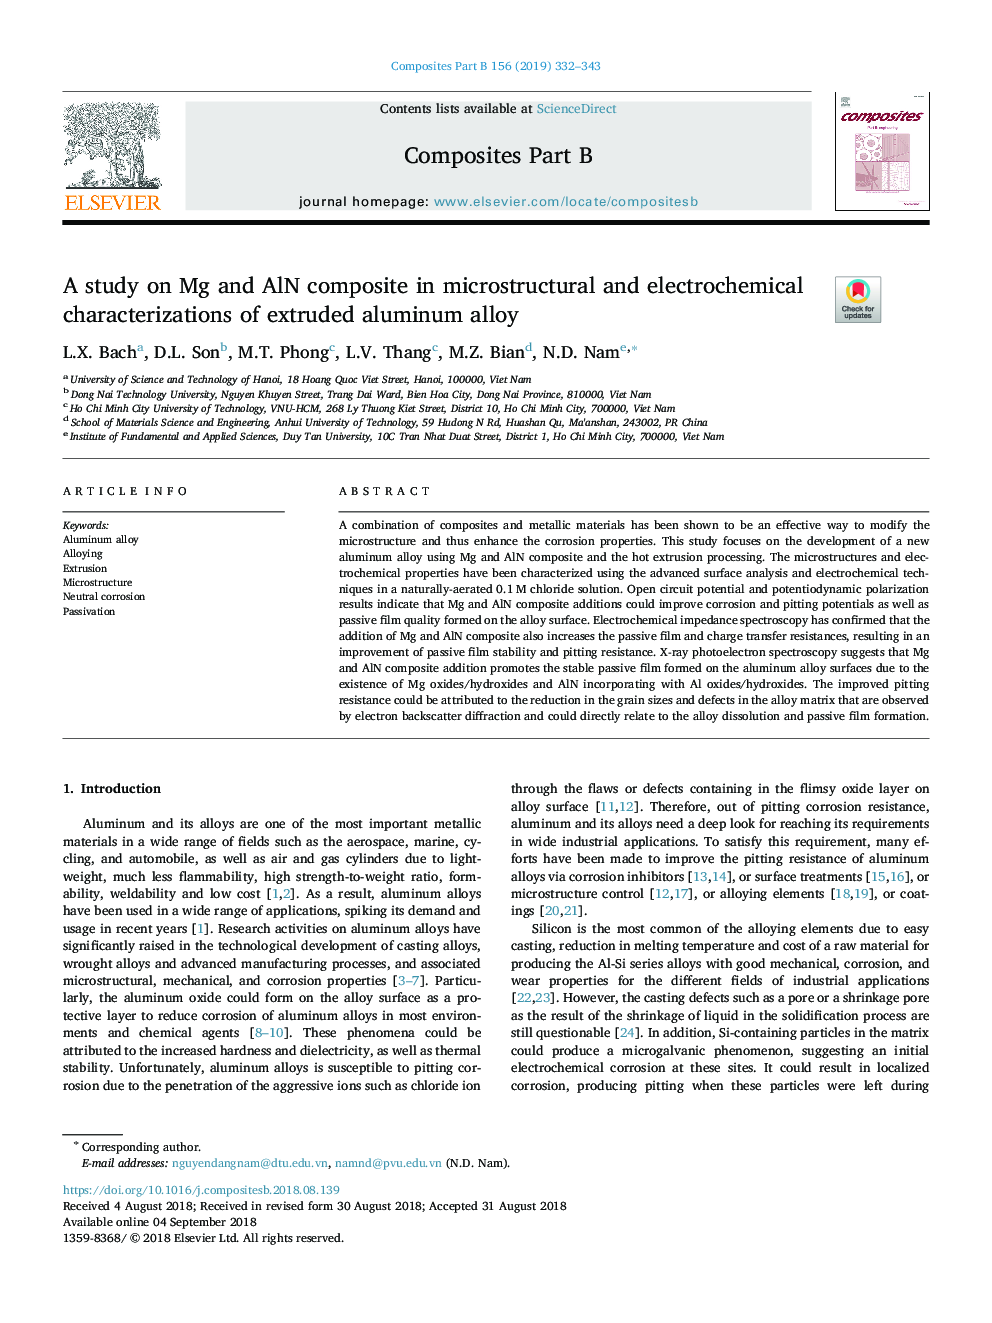 A study on Mg and AlN composite in microstructural and electrochemical characterizations of extruded aluminum alloy